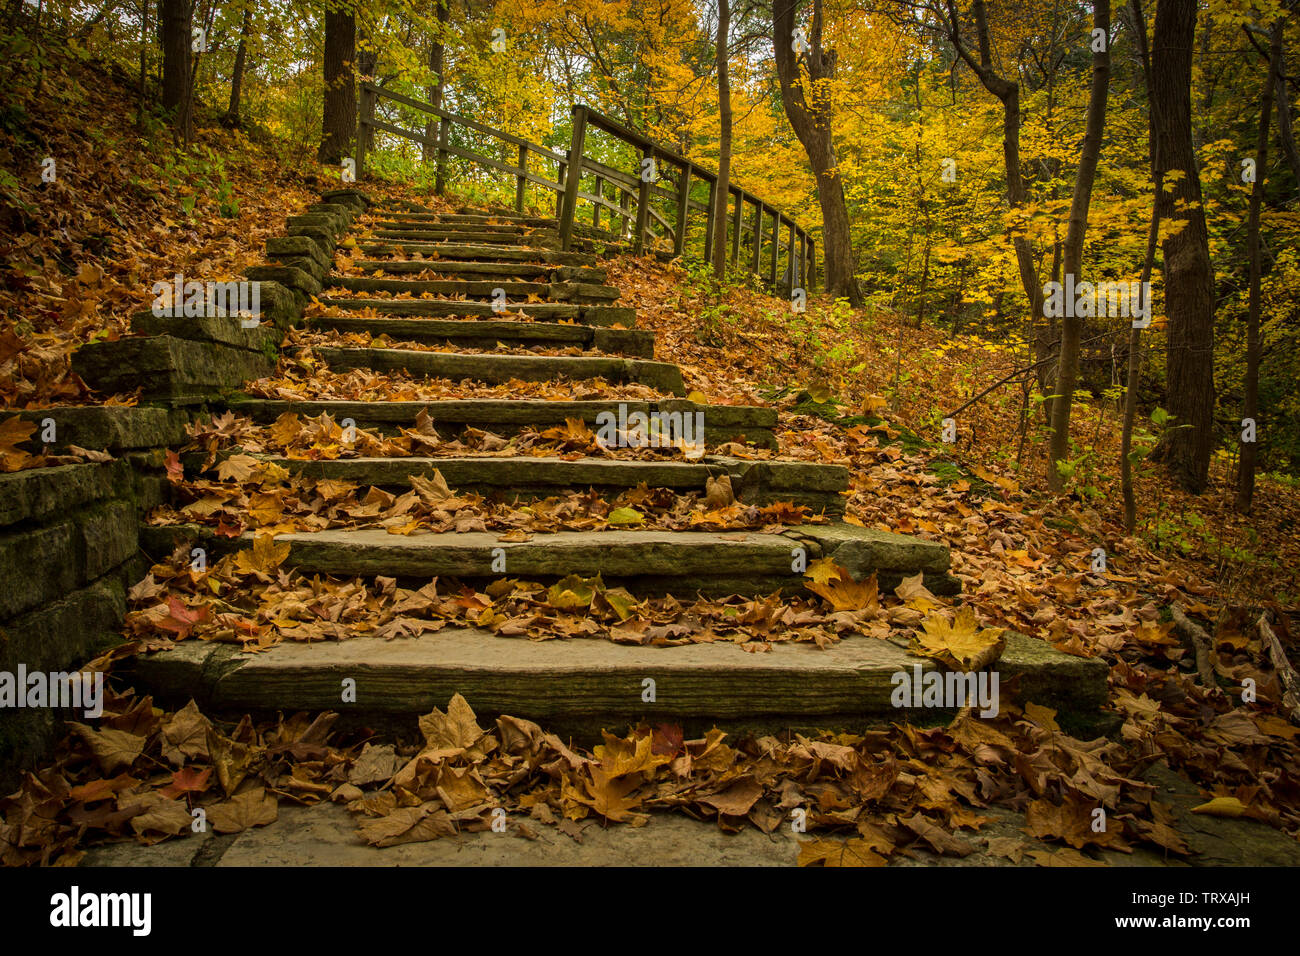 Fall Autumn Scene with colorful leaves on a stairway leading up to a bridge Stock Photo